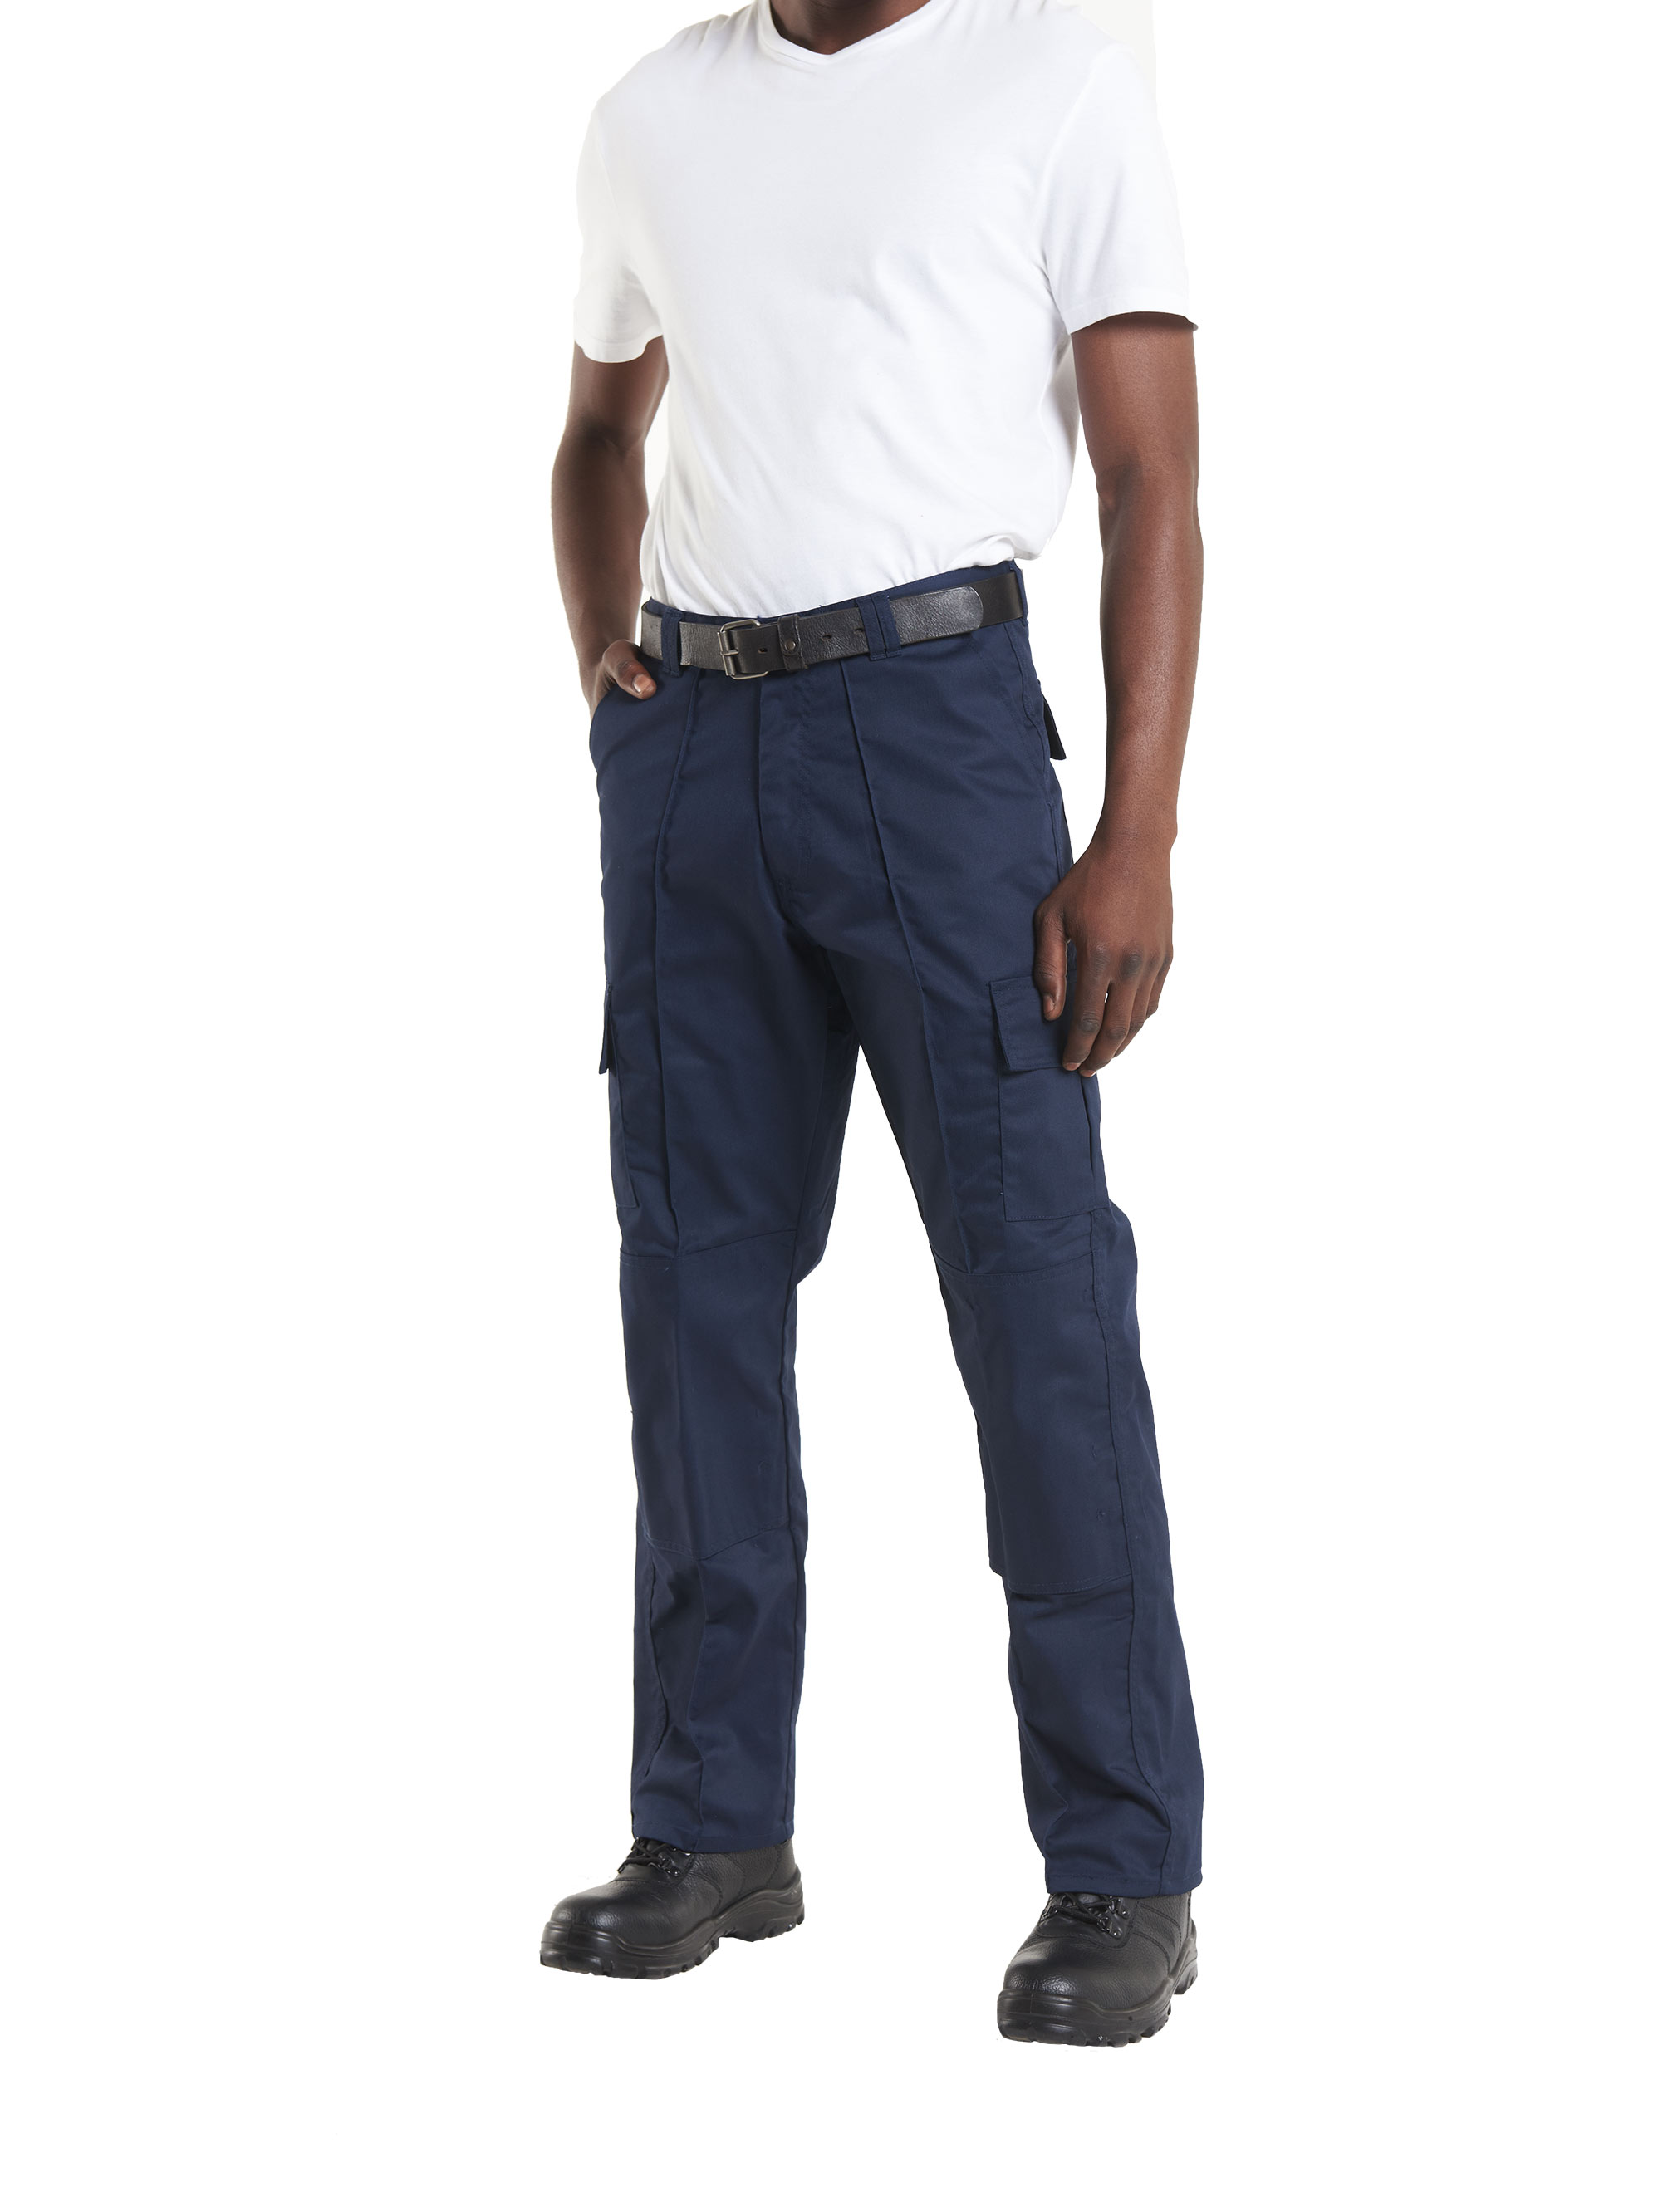 Cargo Trouser with Knee Pad Pockets Long